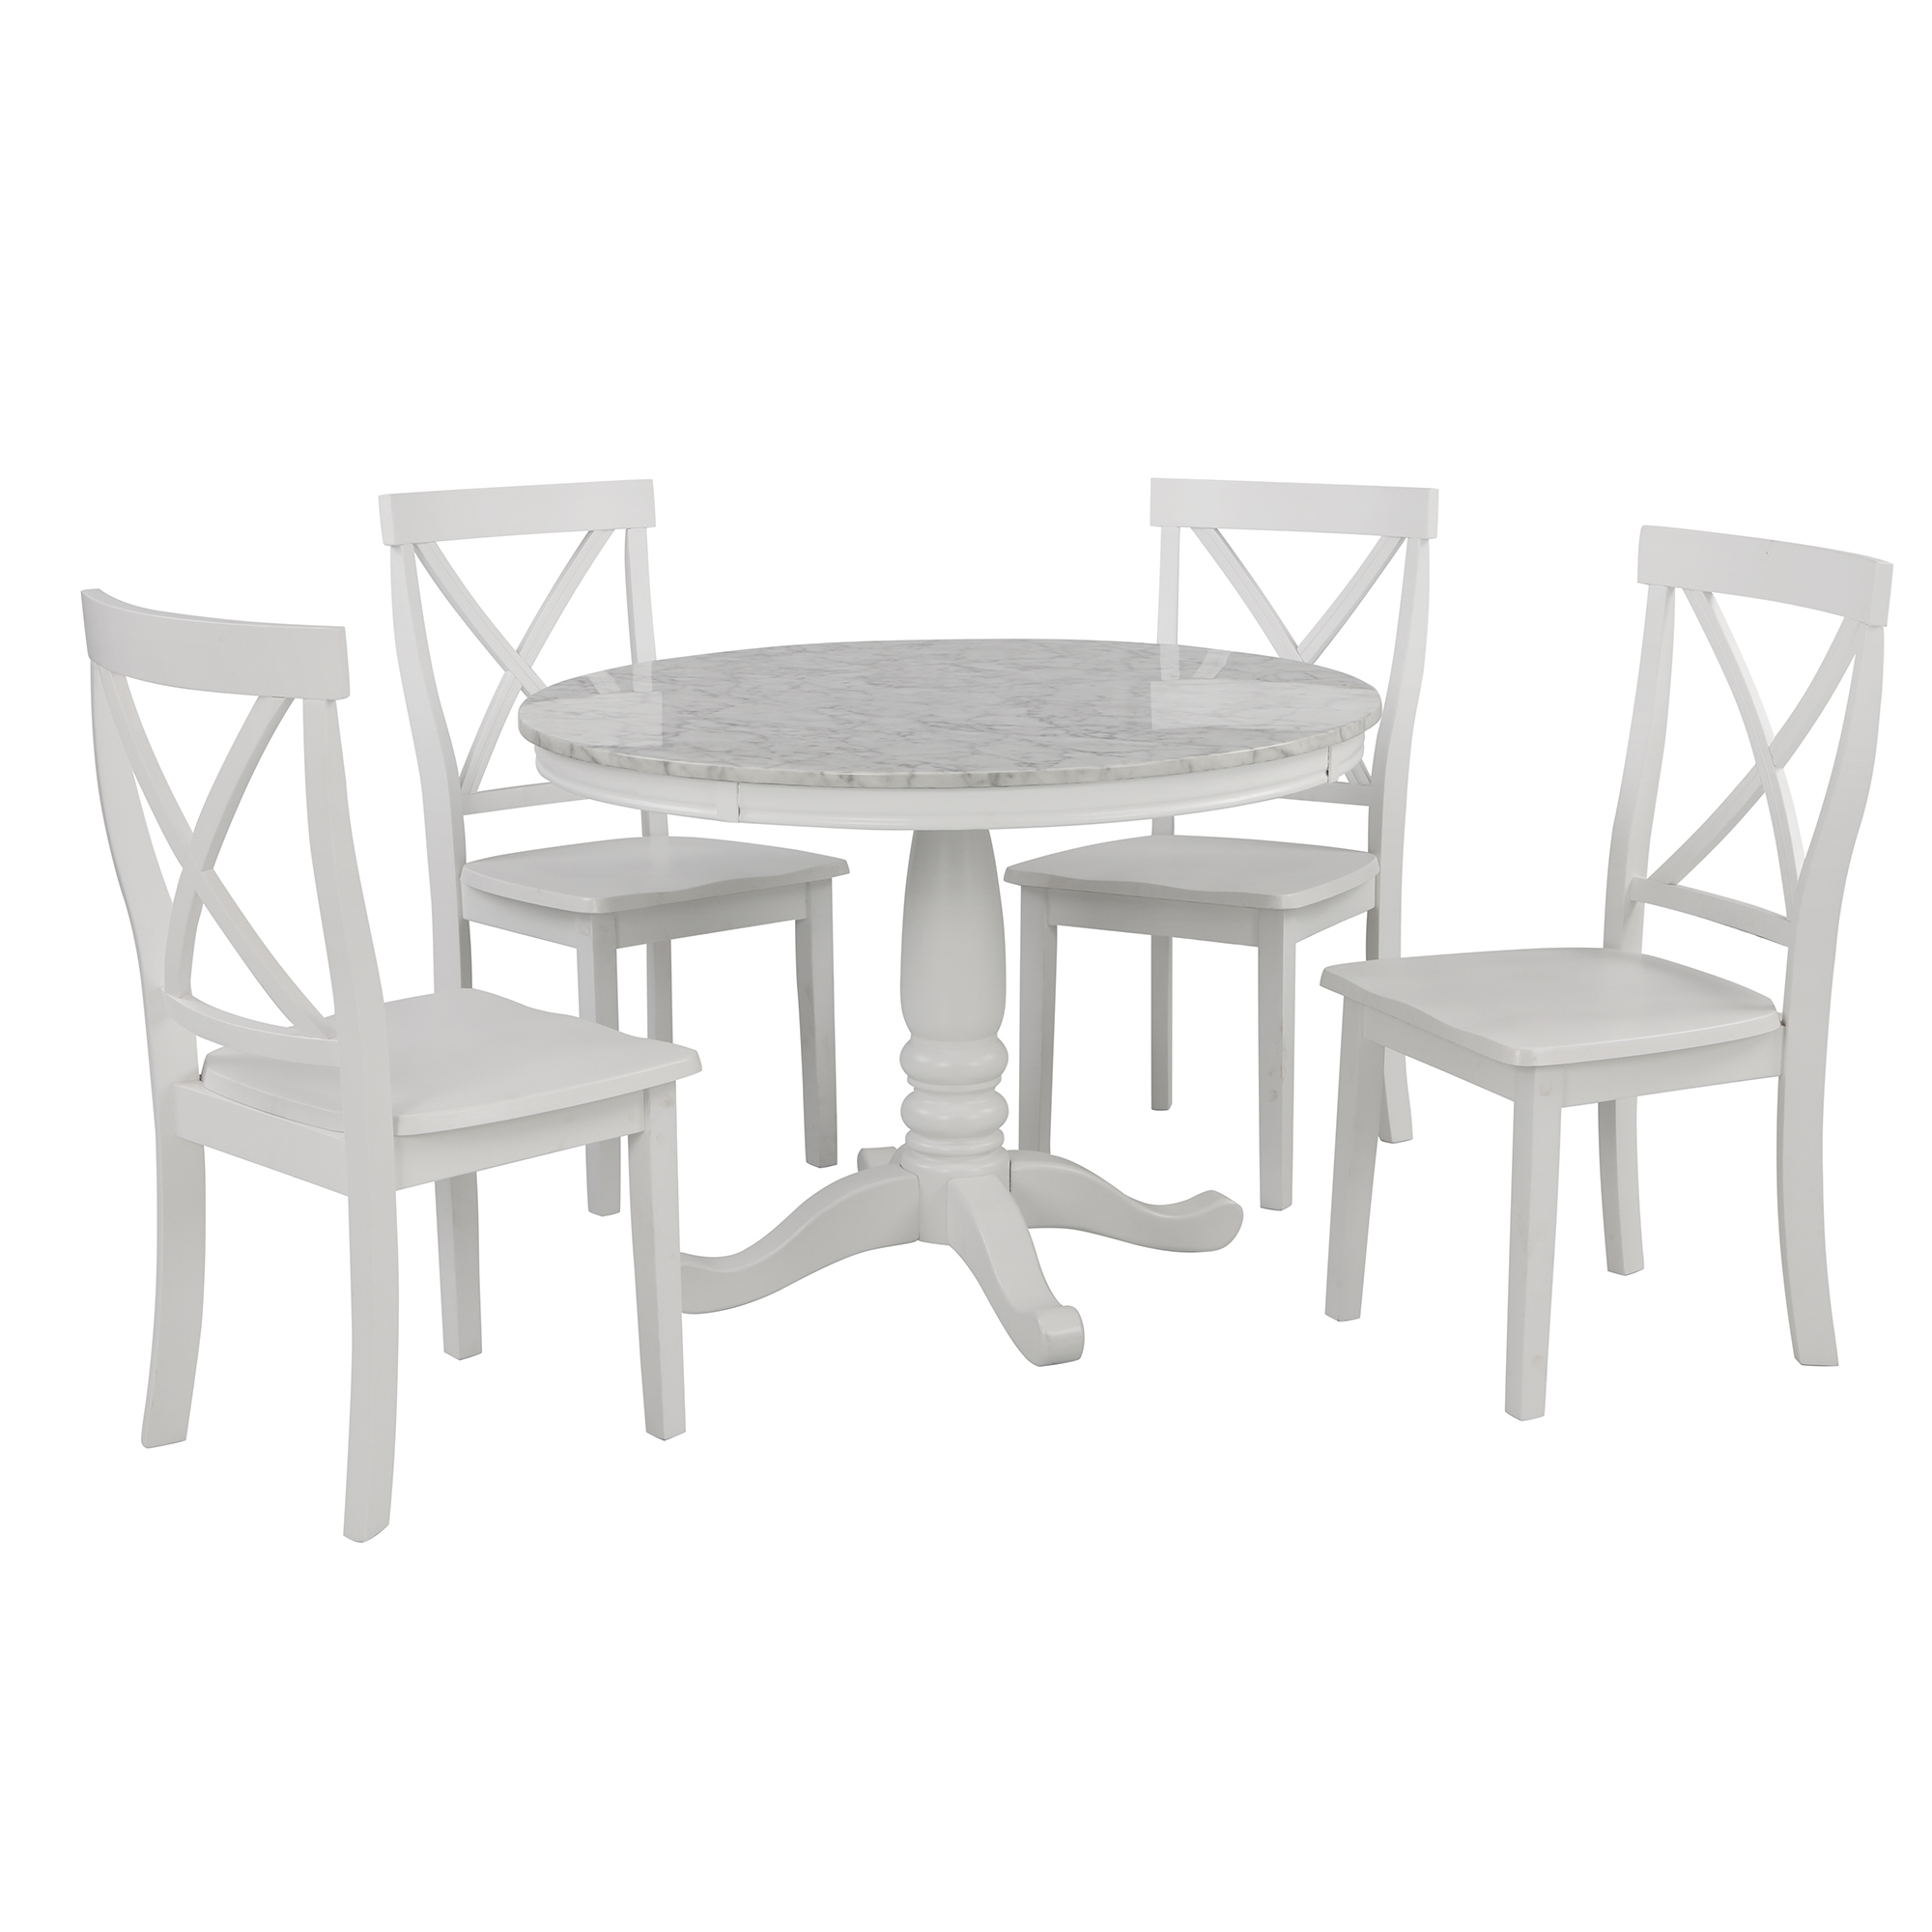 5 Pieces Dining Table And Chairs Set For 4 Persons - SG000340AAA